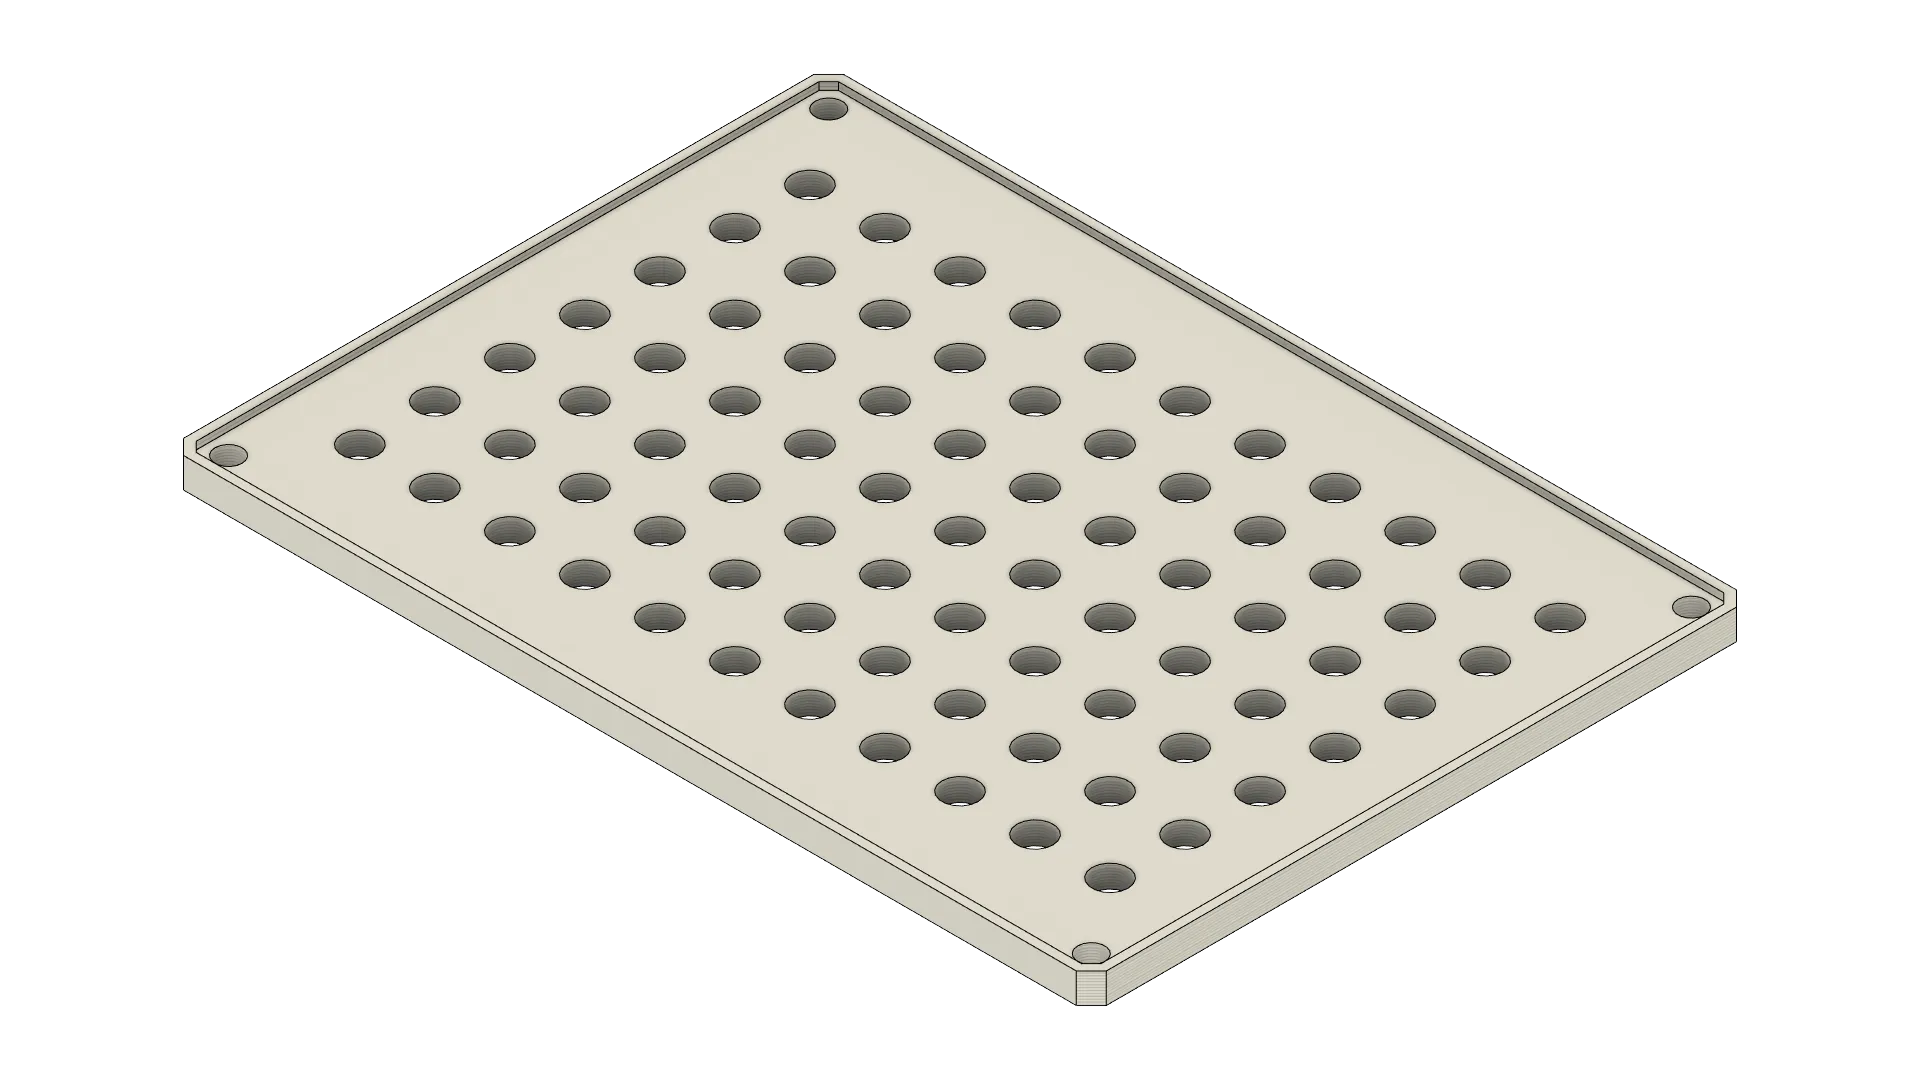 00189 Internal mounting plate for MEB covers